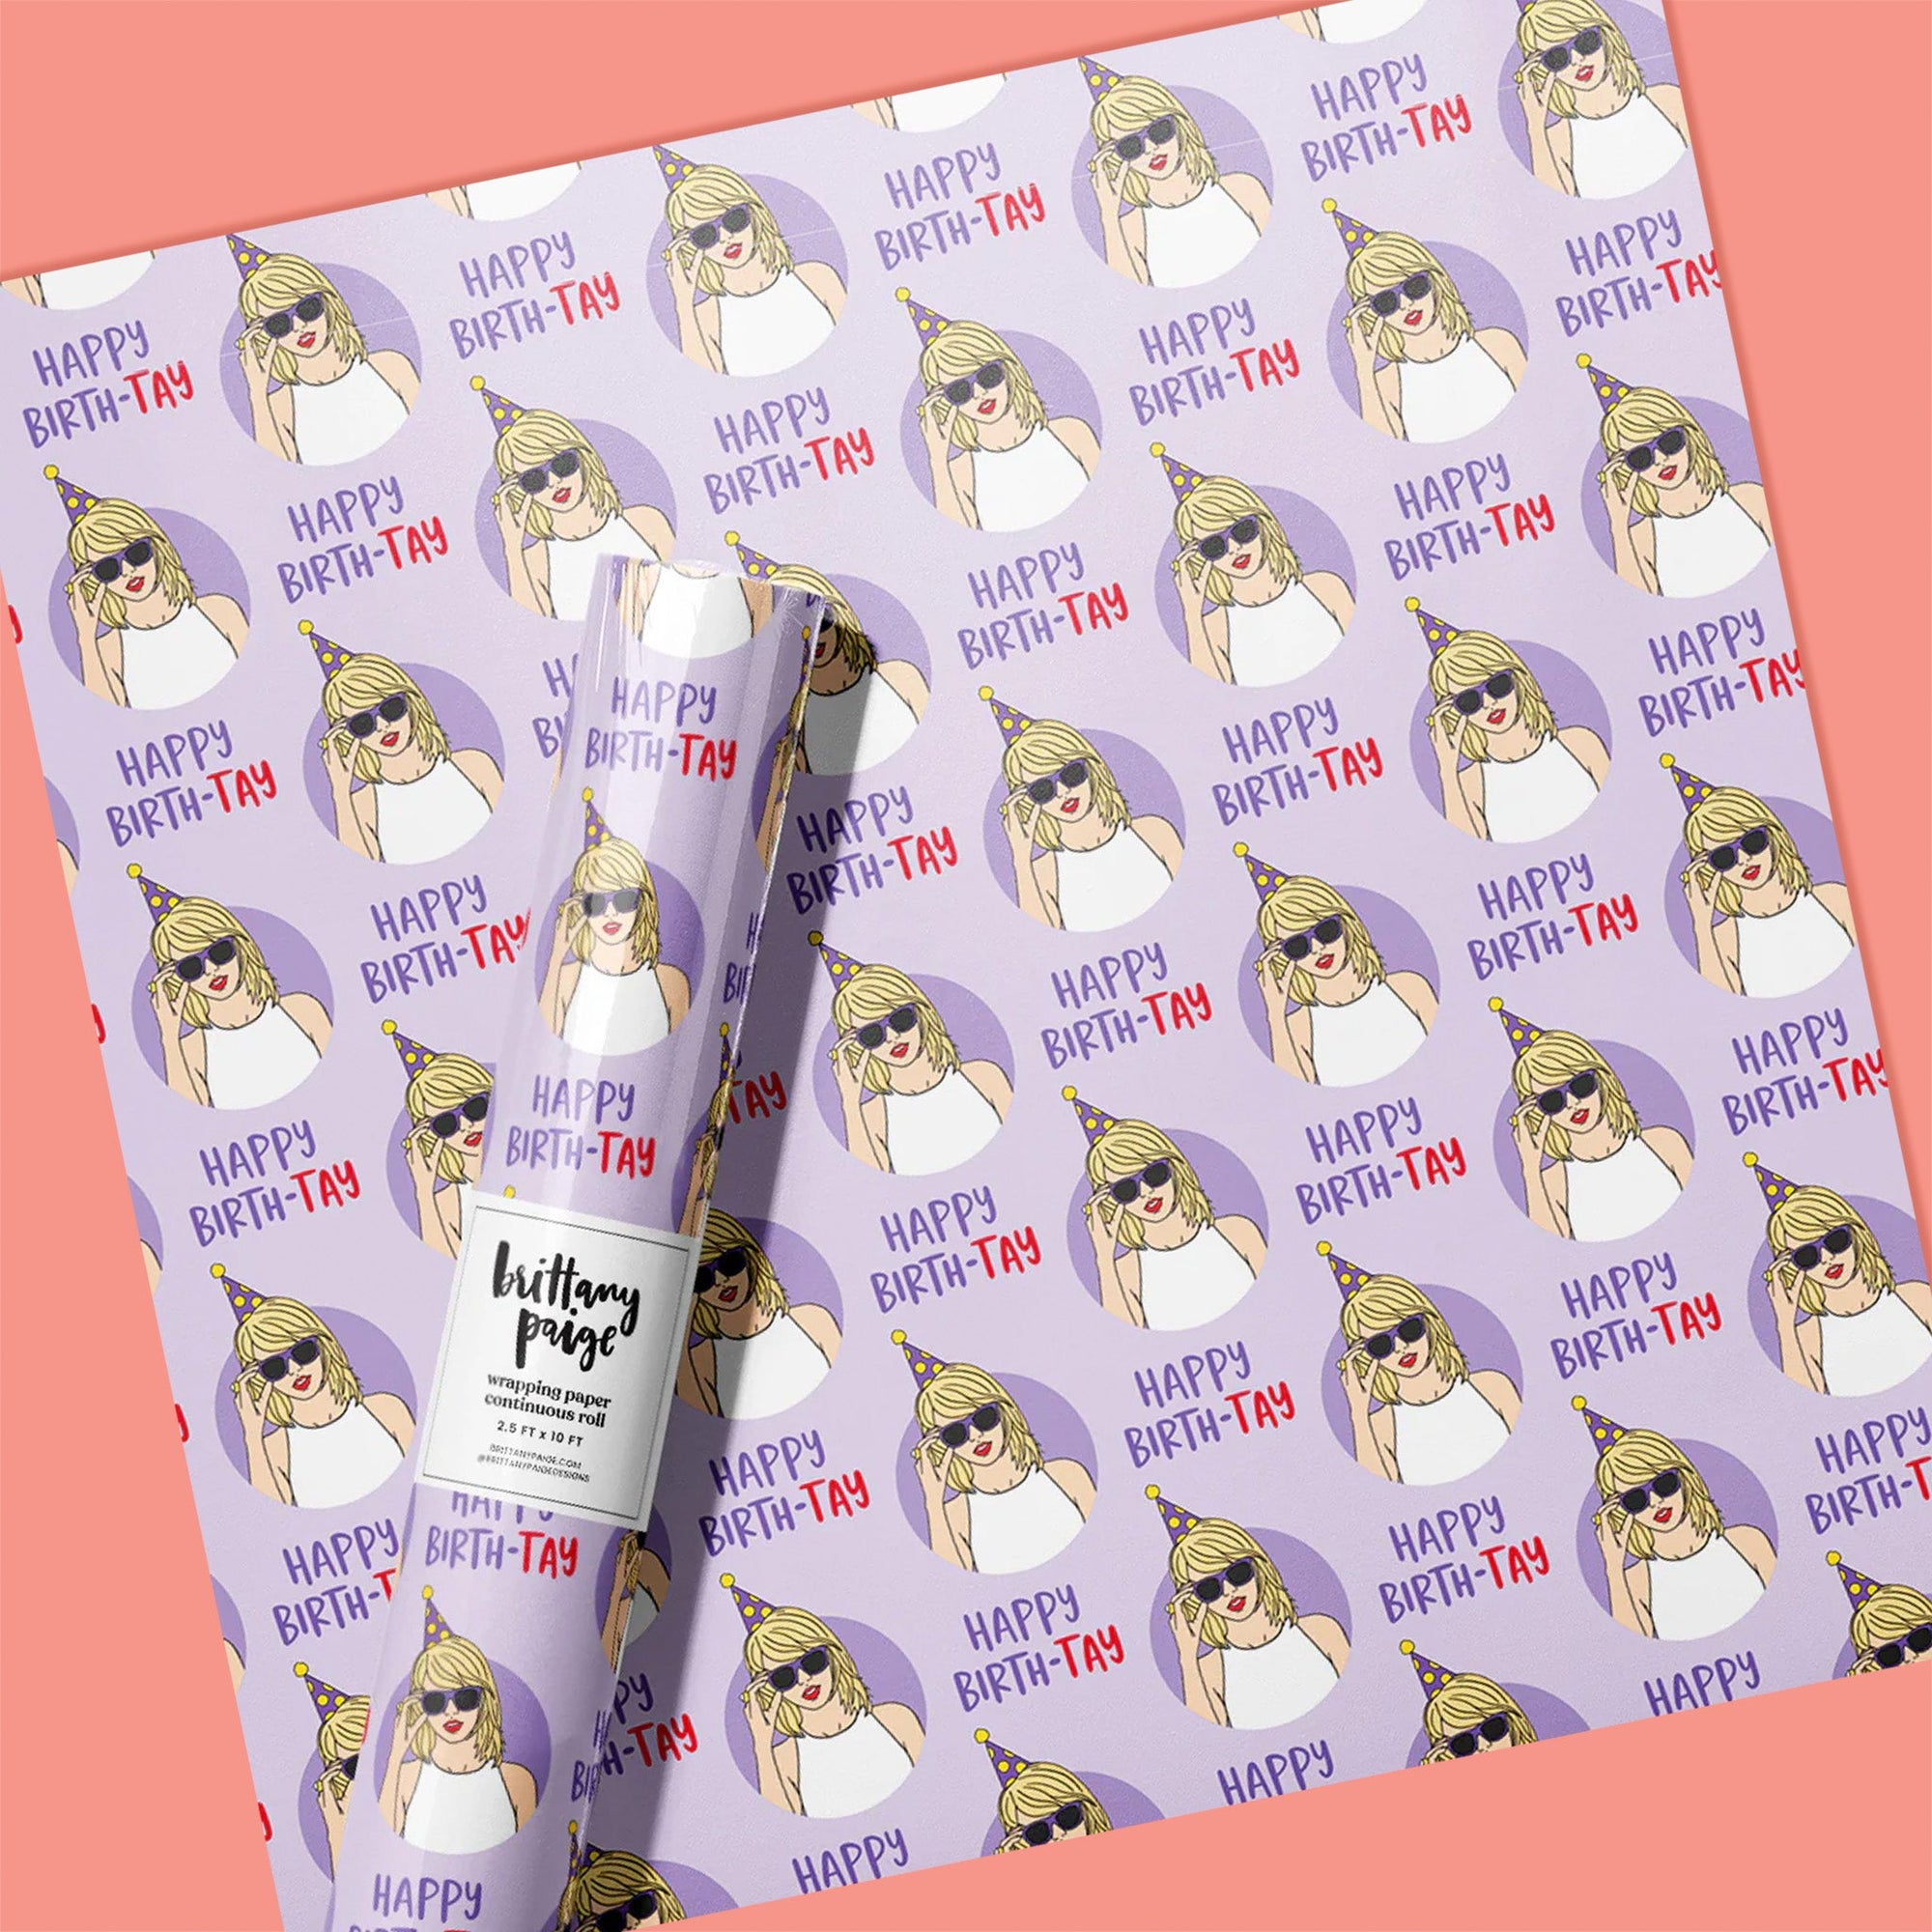 On a coral pink background sits a gift wrap sheet and a roll. This Taylor Swift inspired gift wrap is light purple with darker purple circles with illustrations of Taylor Swift wearing a party hat and sunglasses. It says "Happy Birth-Tay" in dark purple and red lettering.